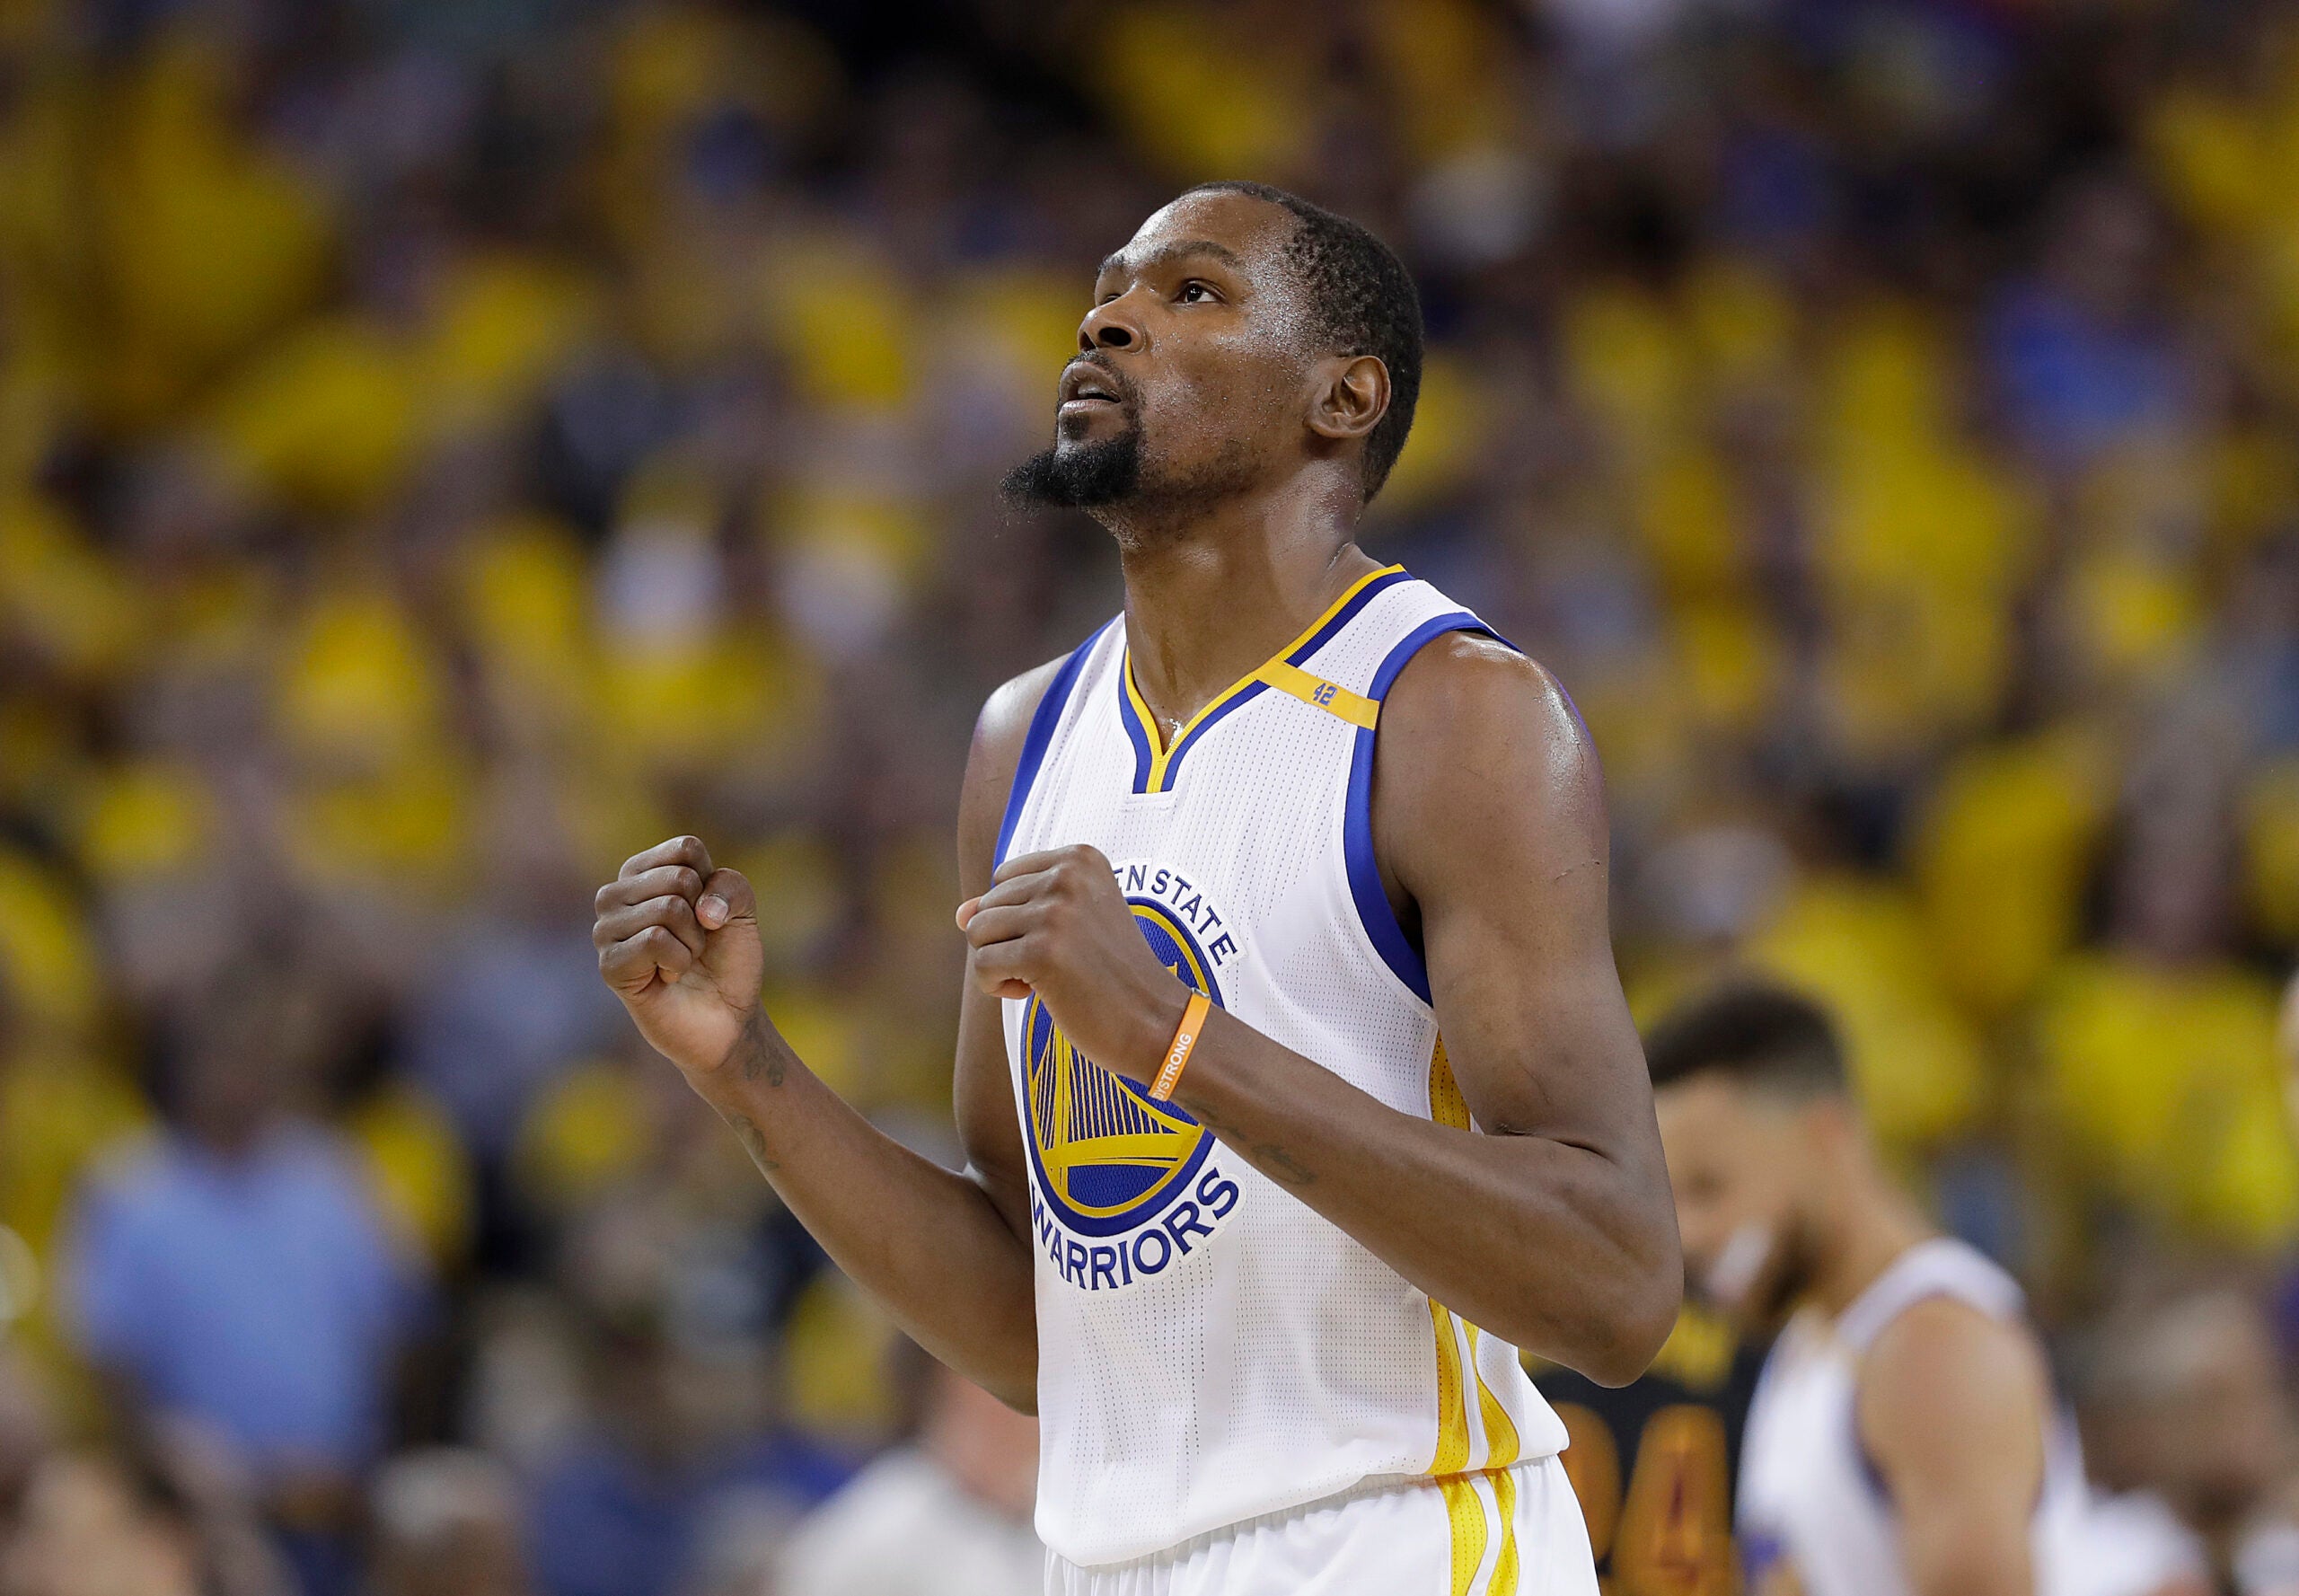 Now Warriors' All-Star, Durant was once their 2nd choice